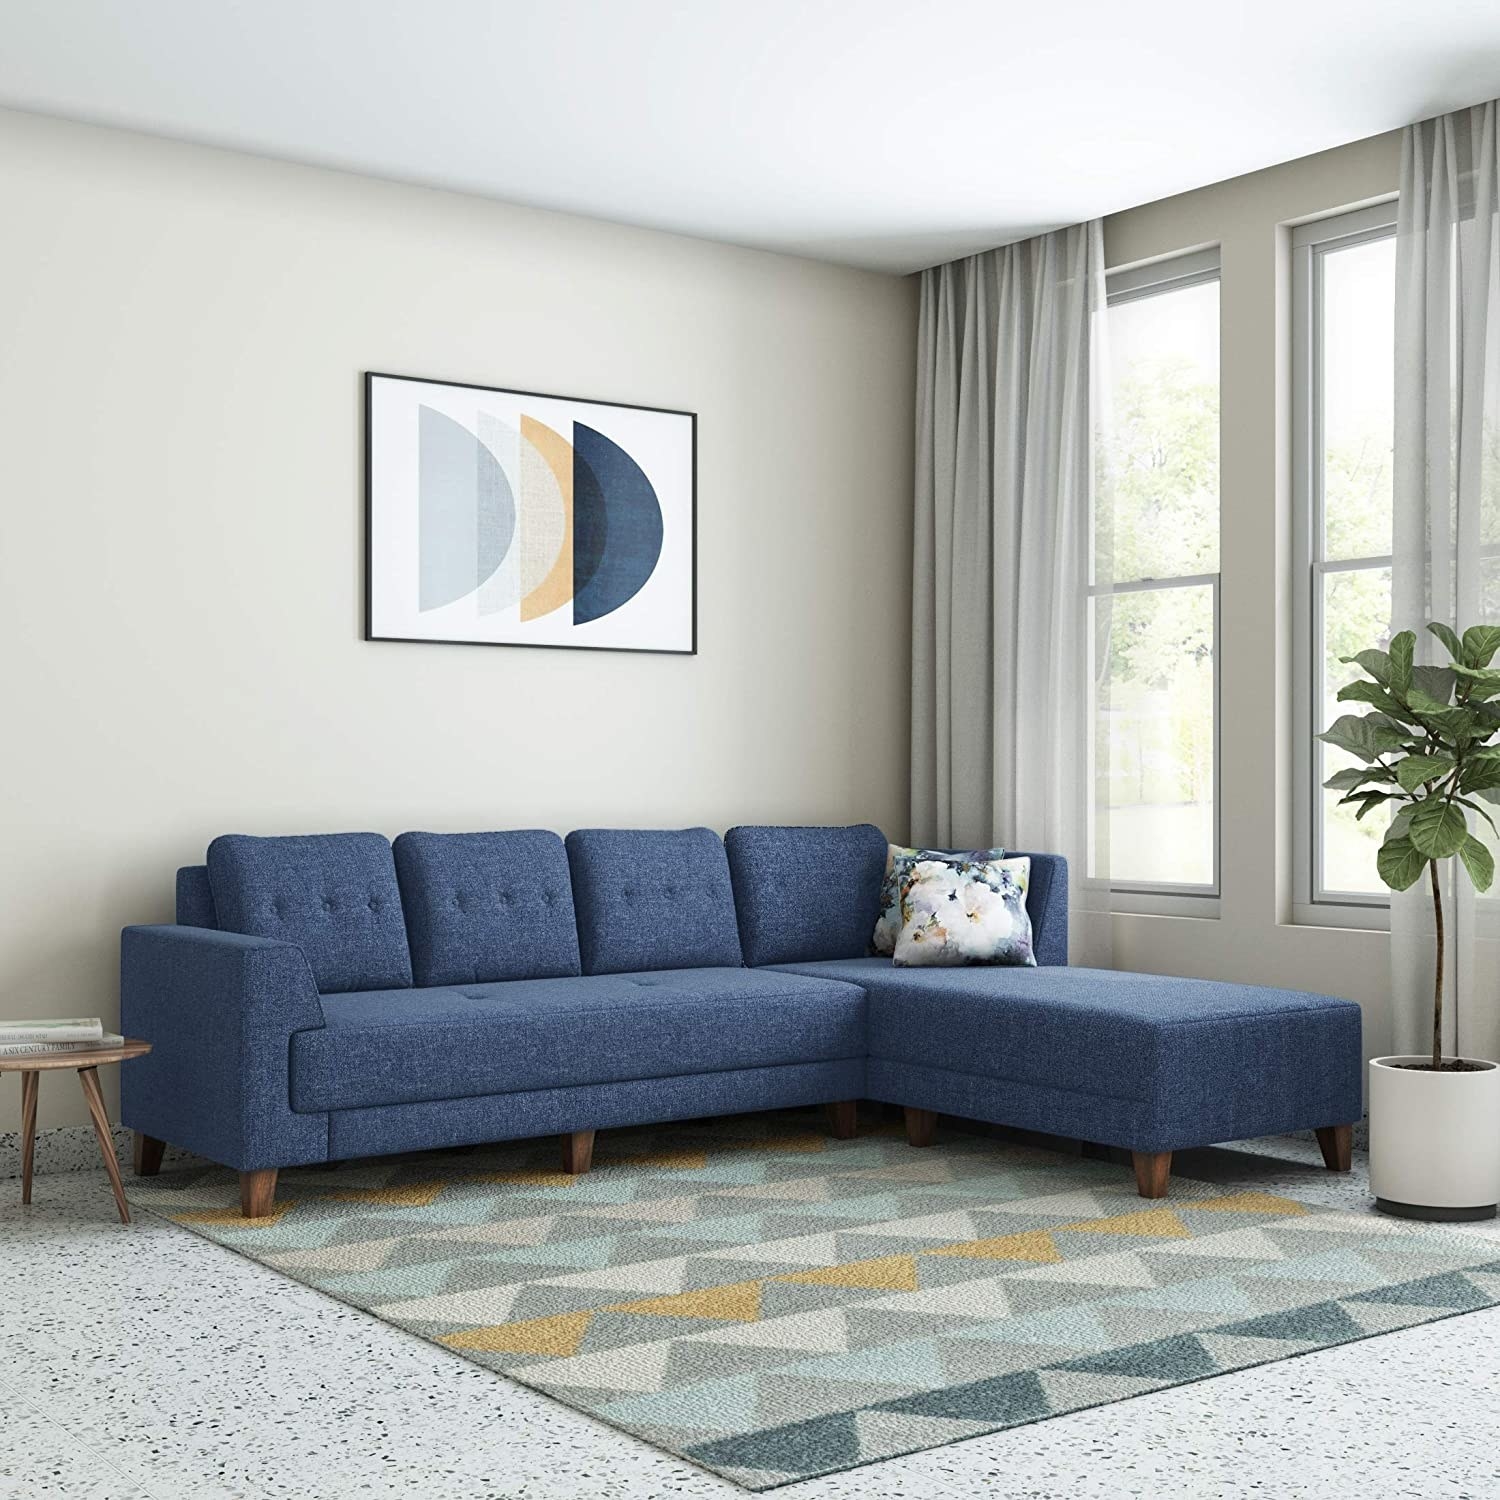 A blue sofa with a pillow